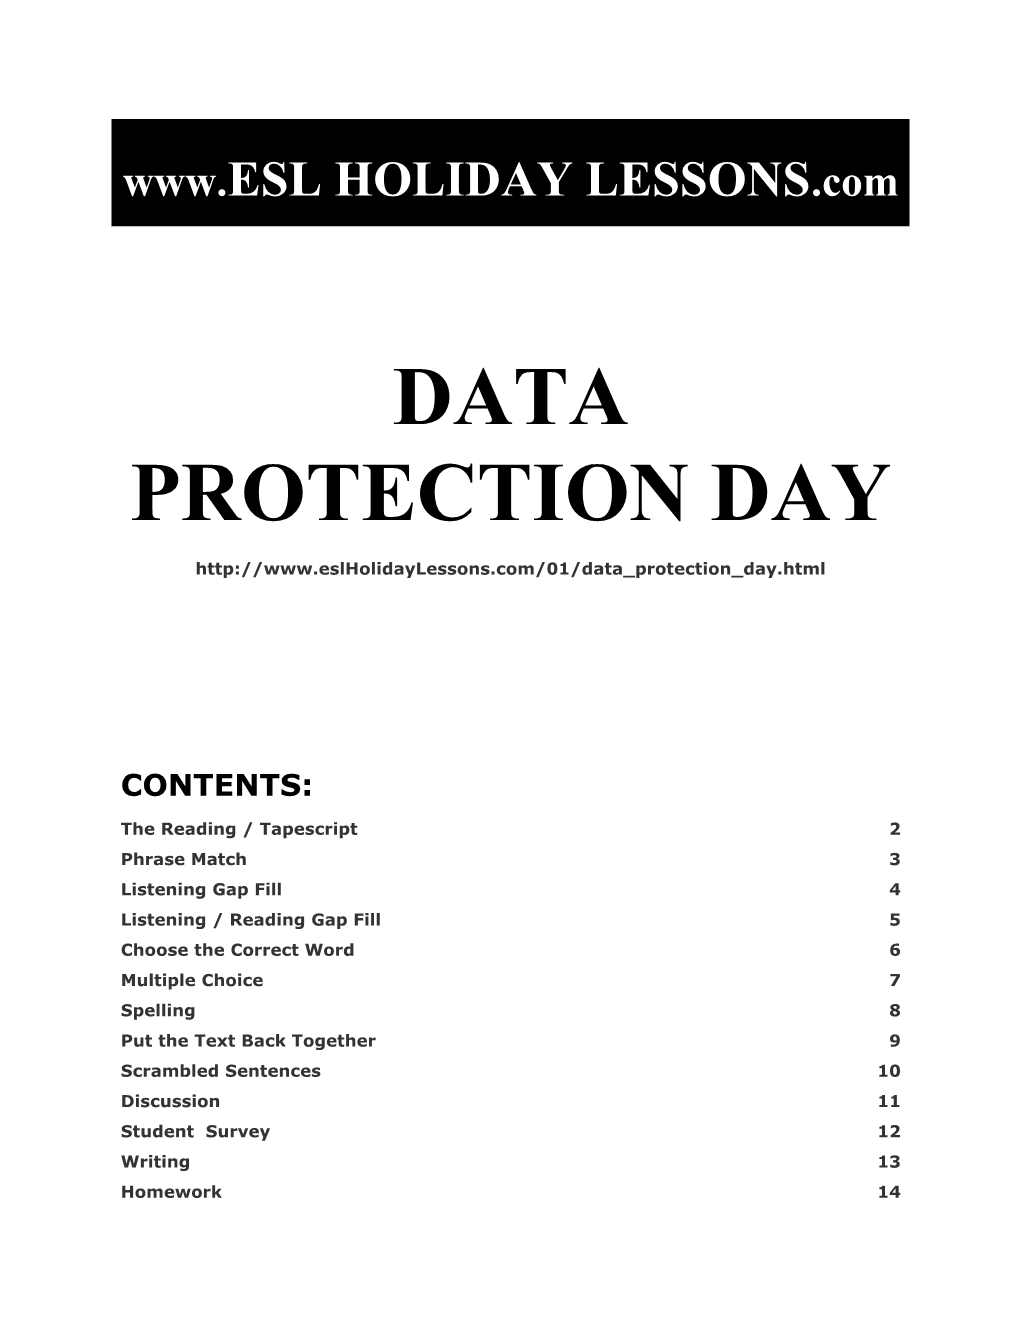 Holiday Lessons - Data Protection Day